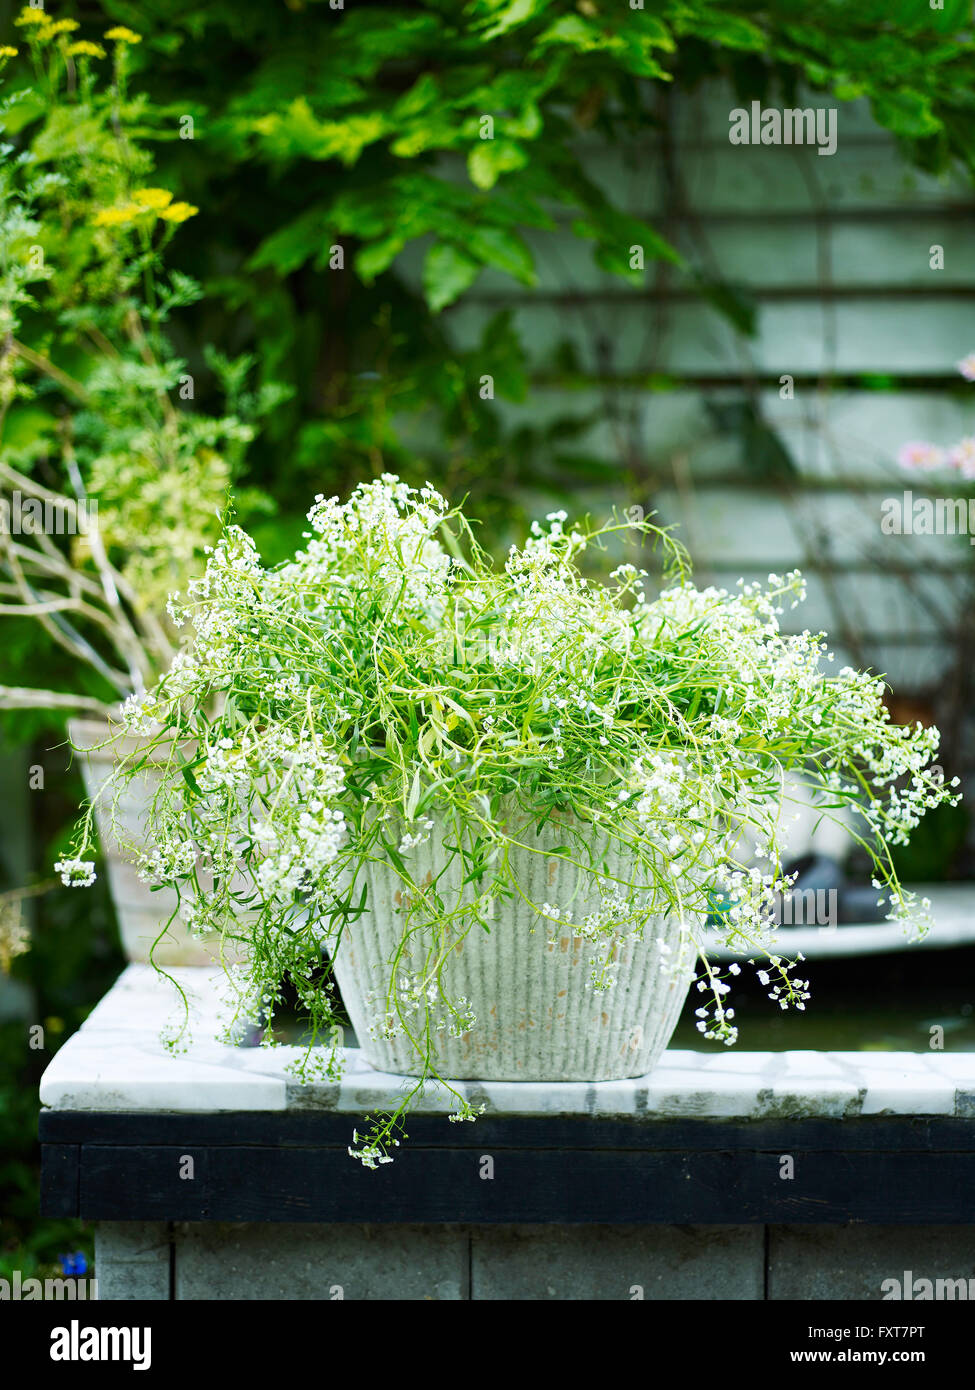 Garden plant with white flowers in white plant pot Stock Photo